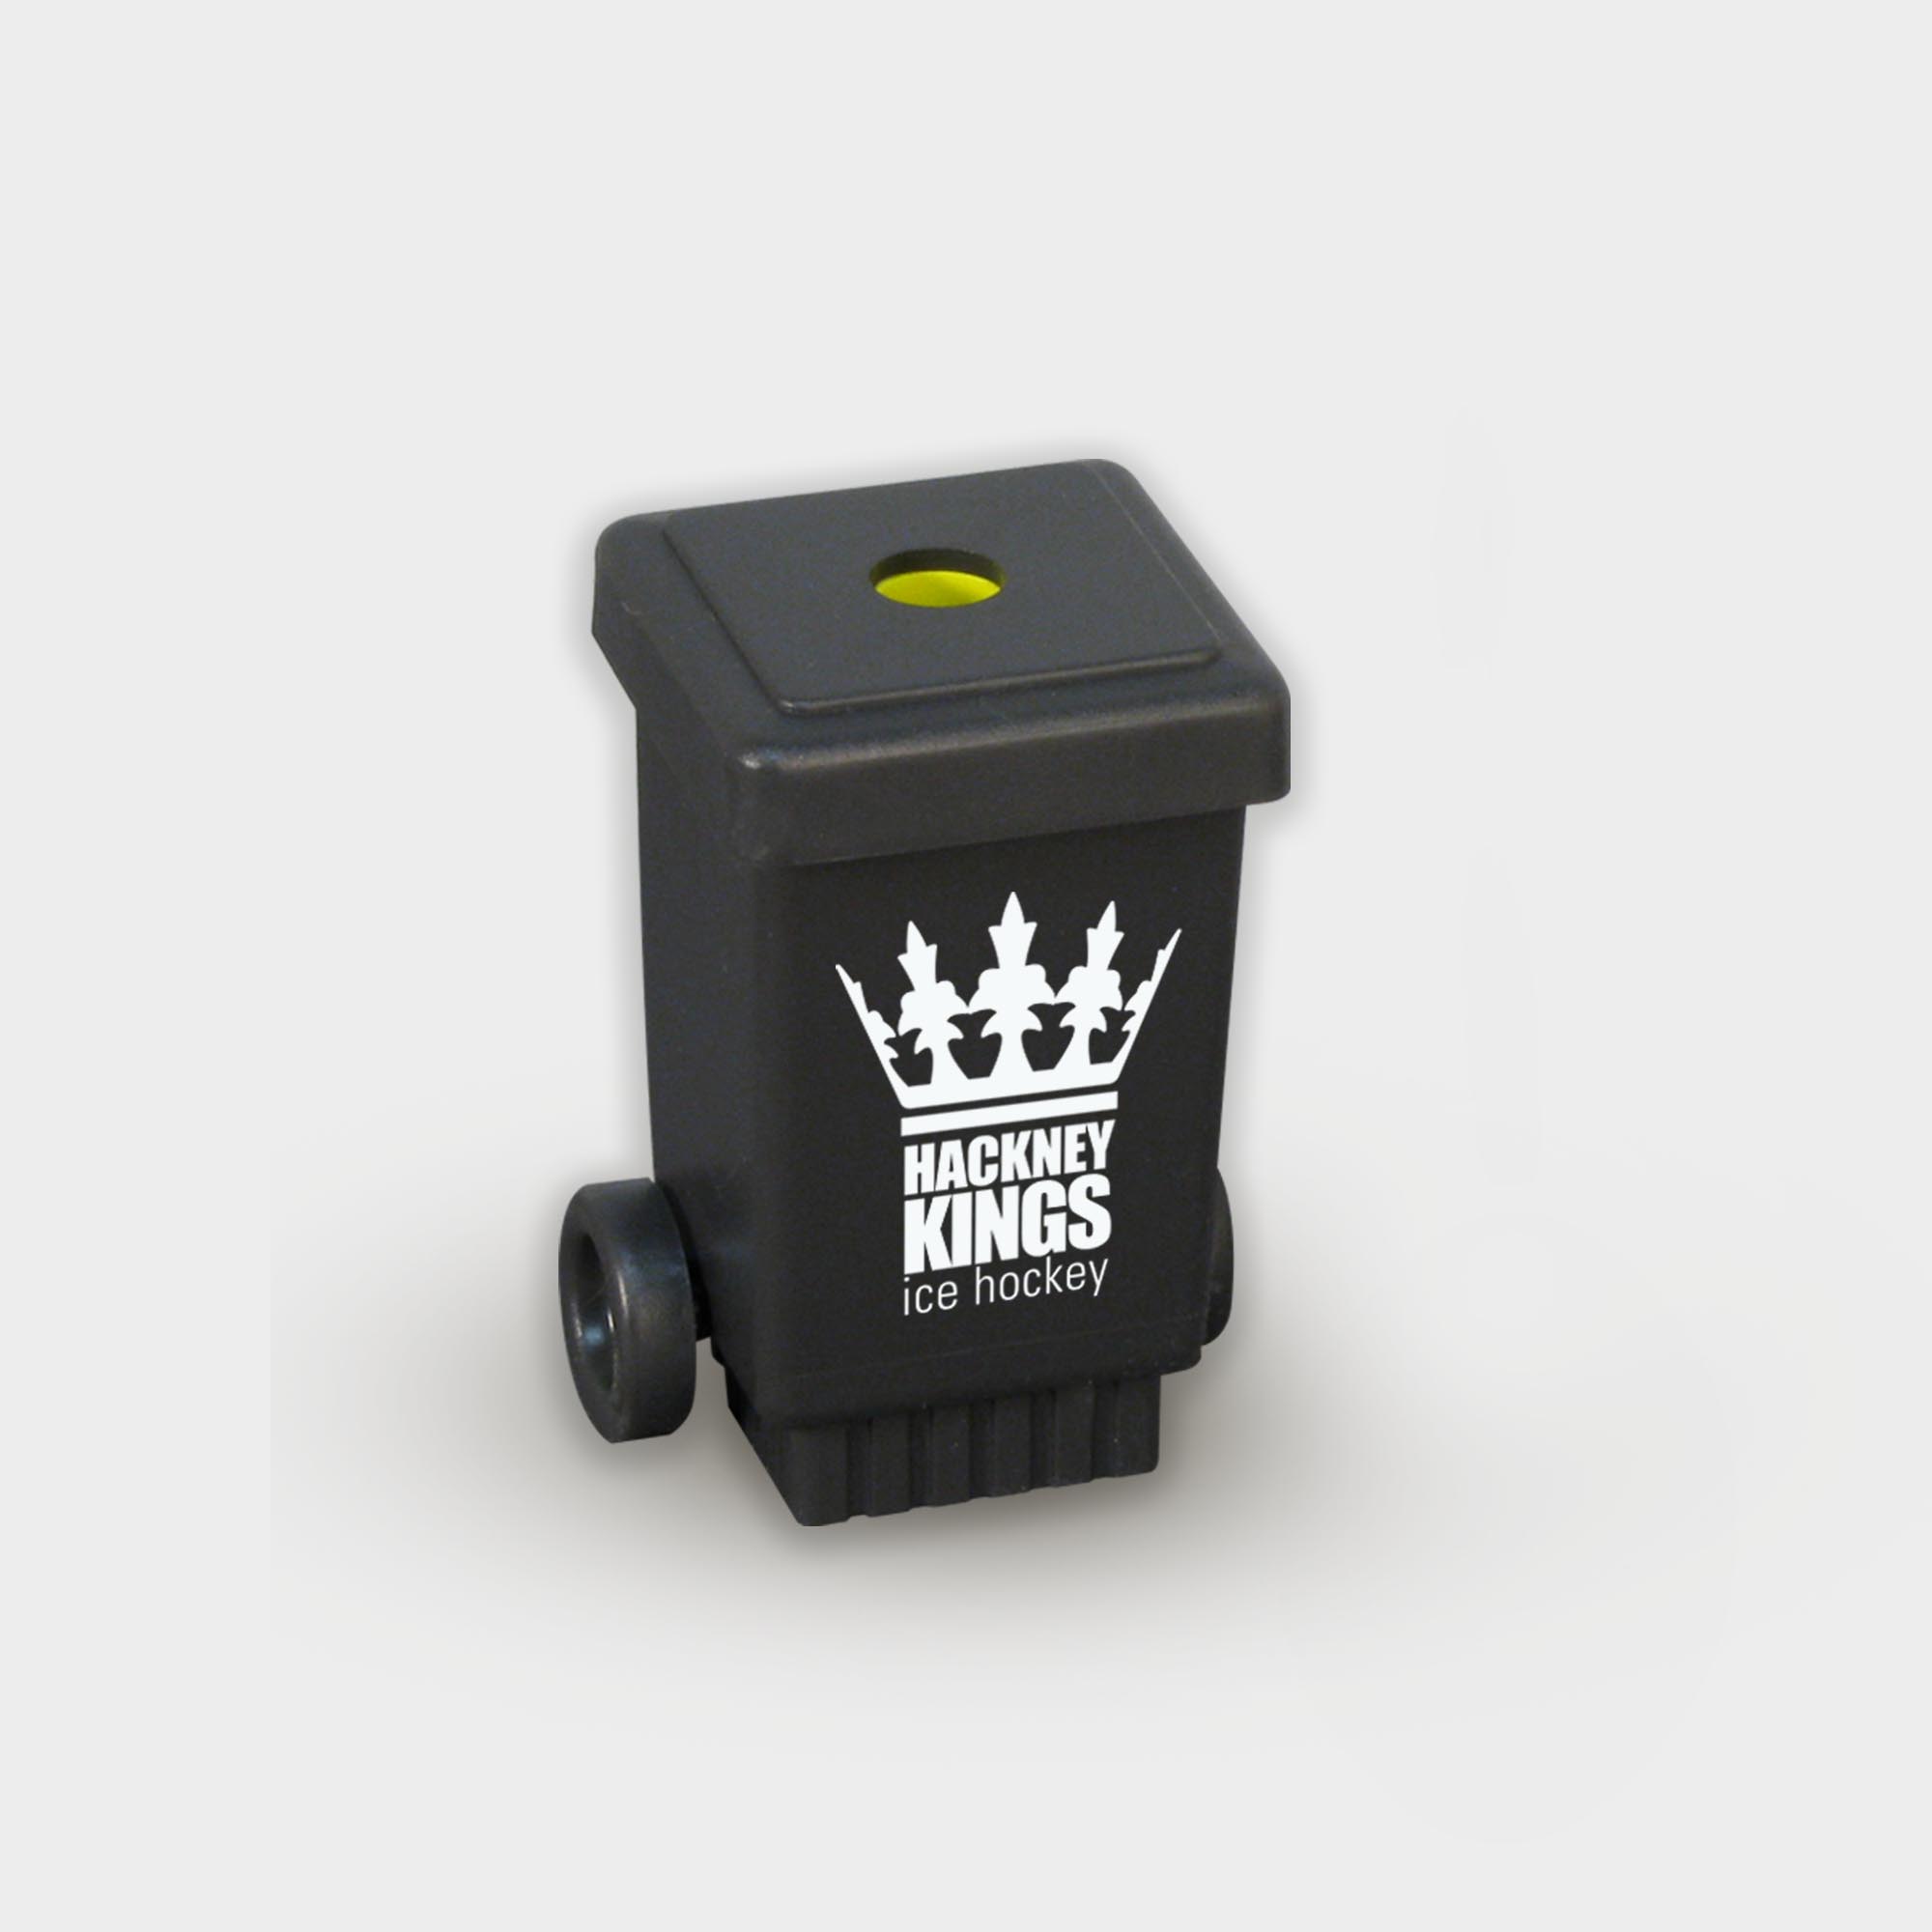 The Green & Good Wheelie Bin Pencil Sharpener made from recycled plastic (polystyrene). Made in the EU and available in a variety of colours.Features include a removable lid and small black wheels. Ideal for councils and waste management companies. Graphite